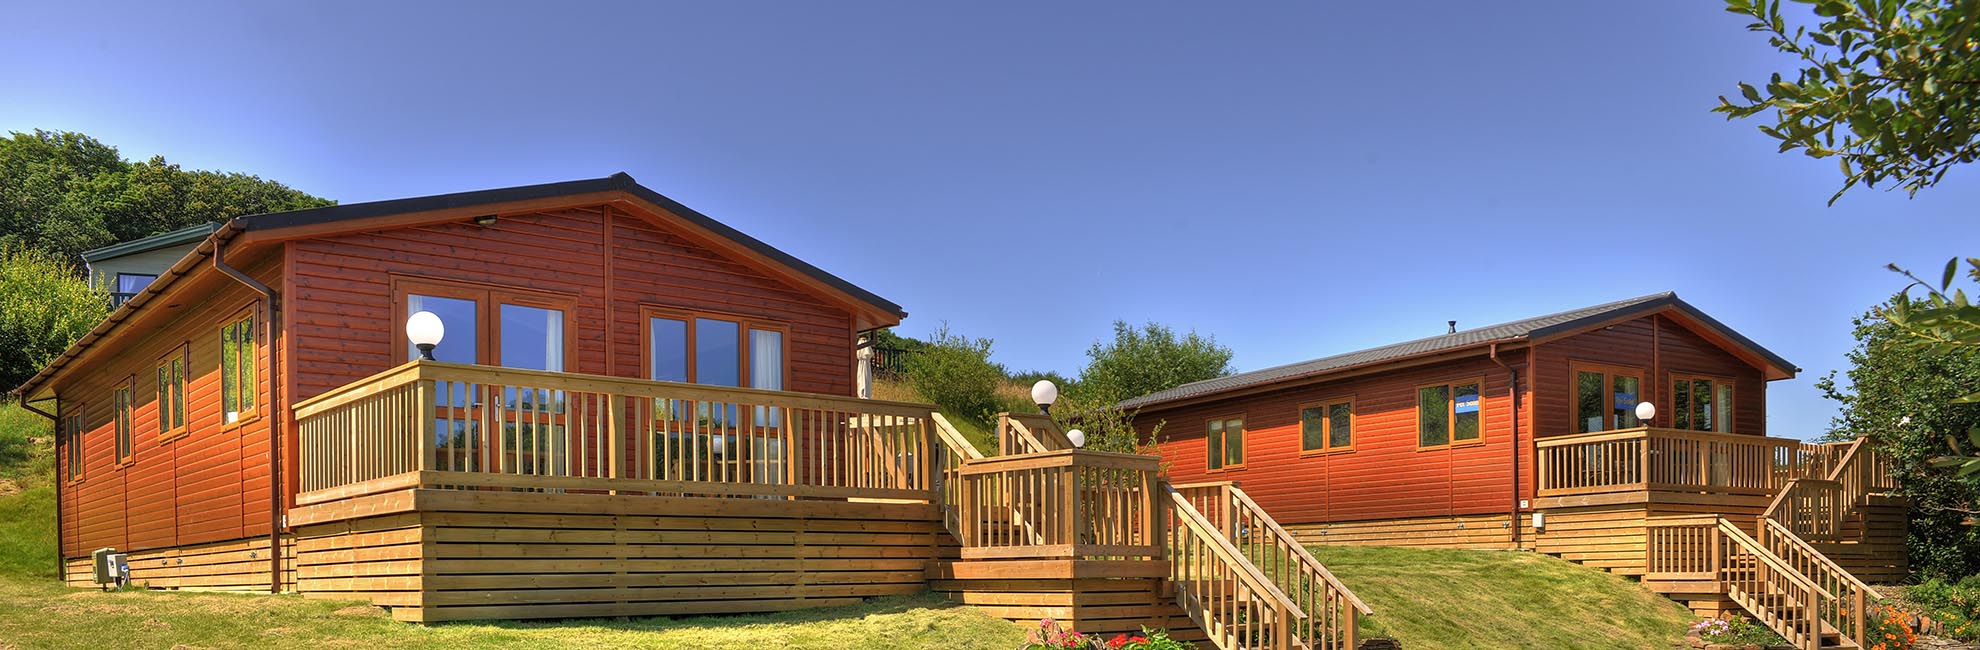 Wooden lodges with verandas in Cornwall